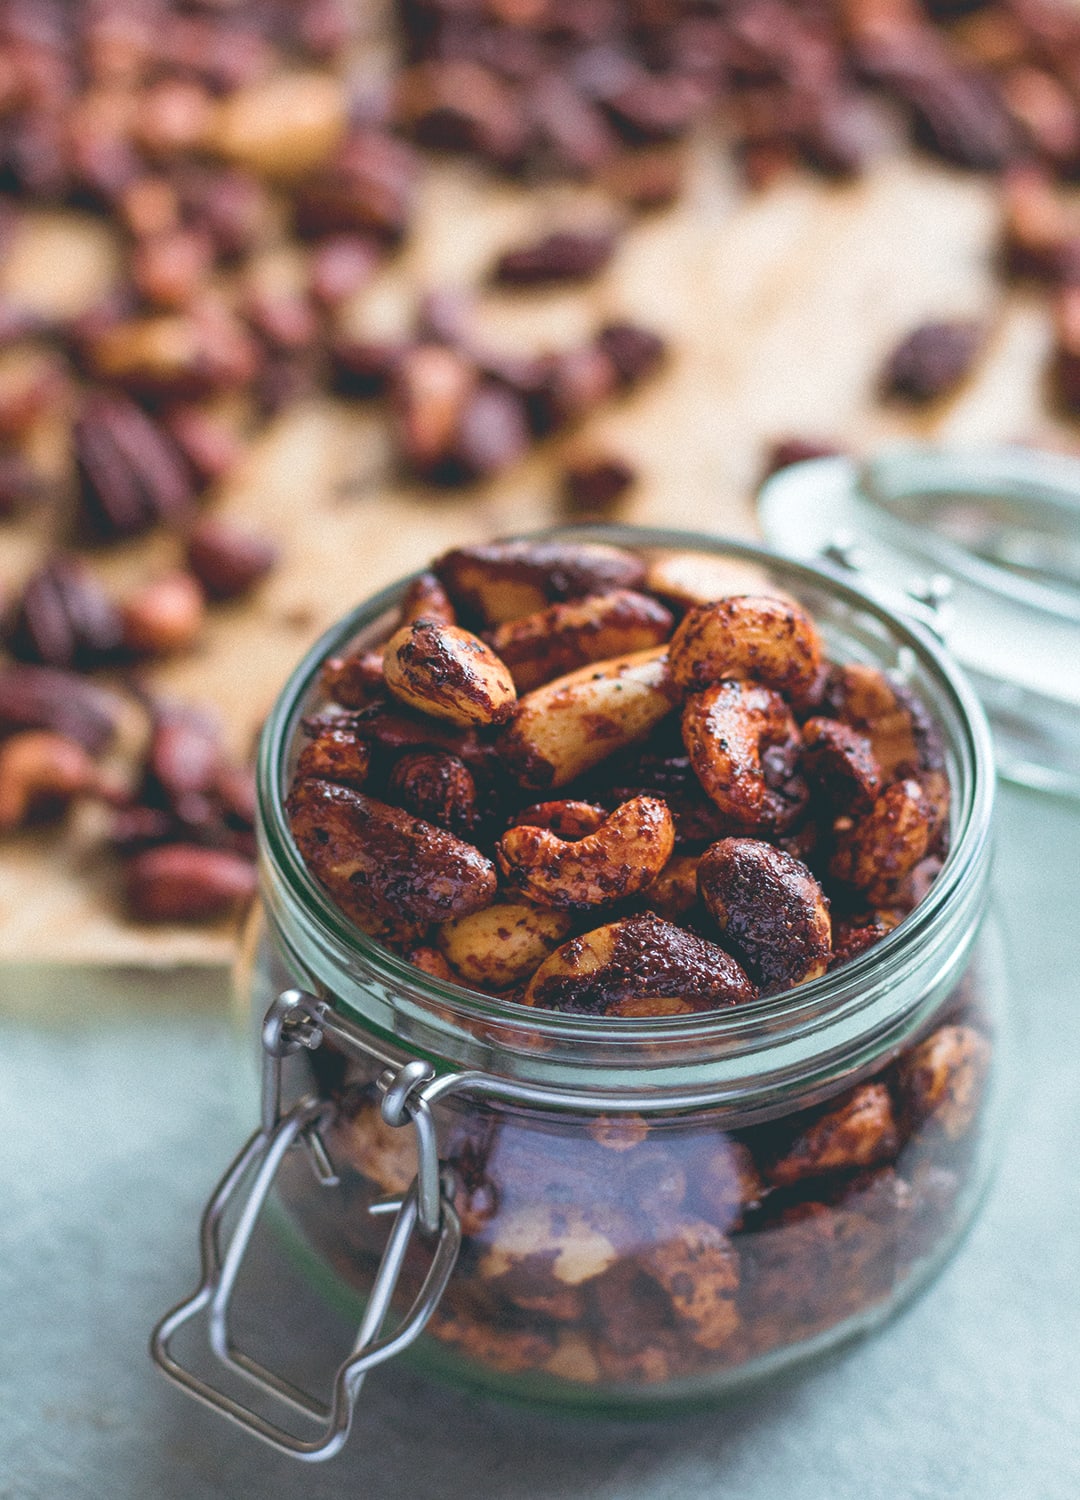 Chipotle Roasted Nuts - maple syrup, coconut oil, and spices. These are incredible! Vegan and gluten-free. | thehealthfulideas.com